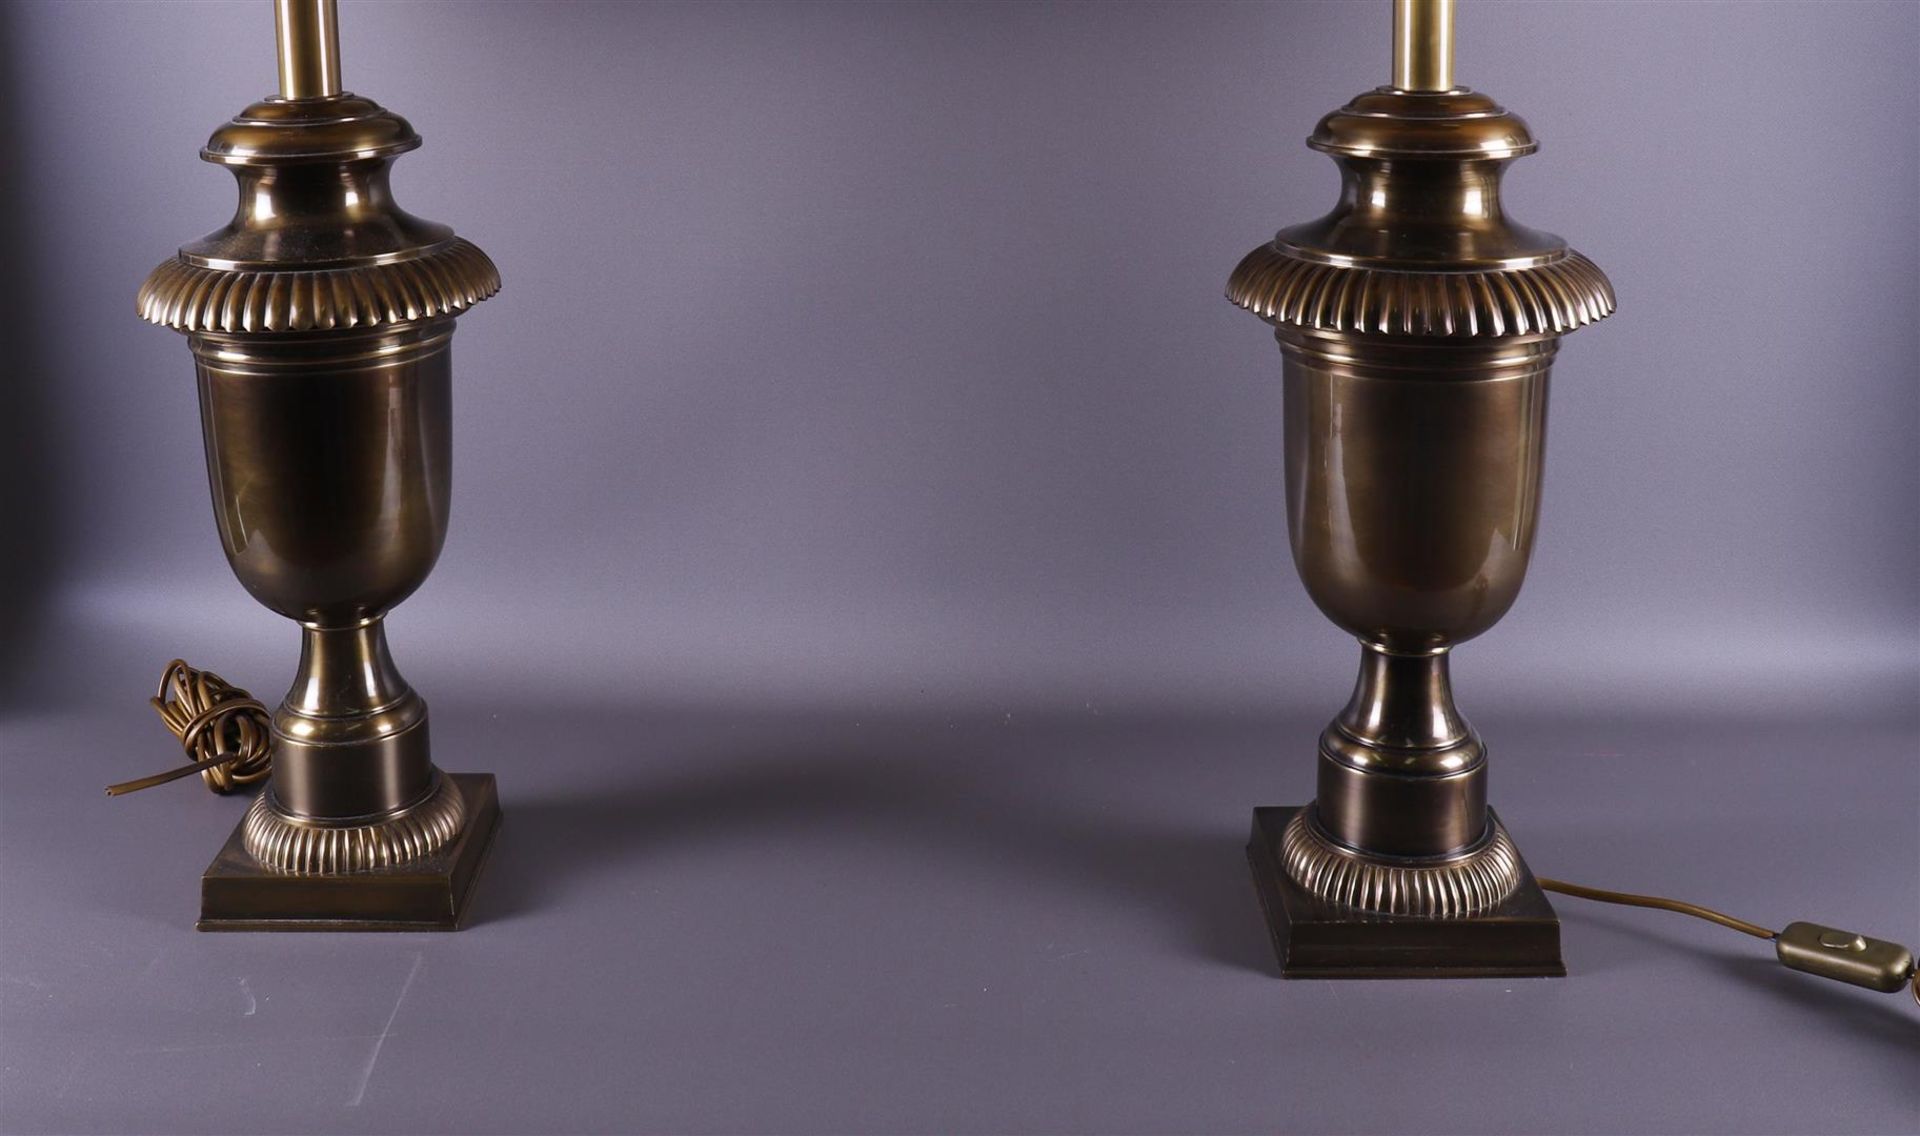 A pair of baluster-shaped bronze lamp bases with fabric lampshades, 20th century - Image 2 of 2